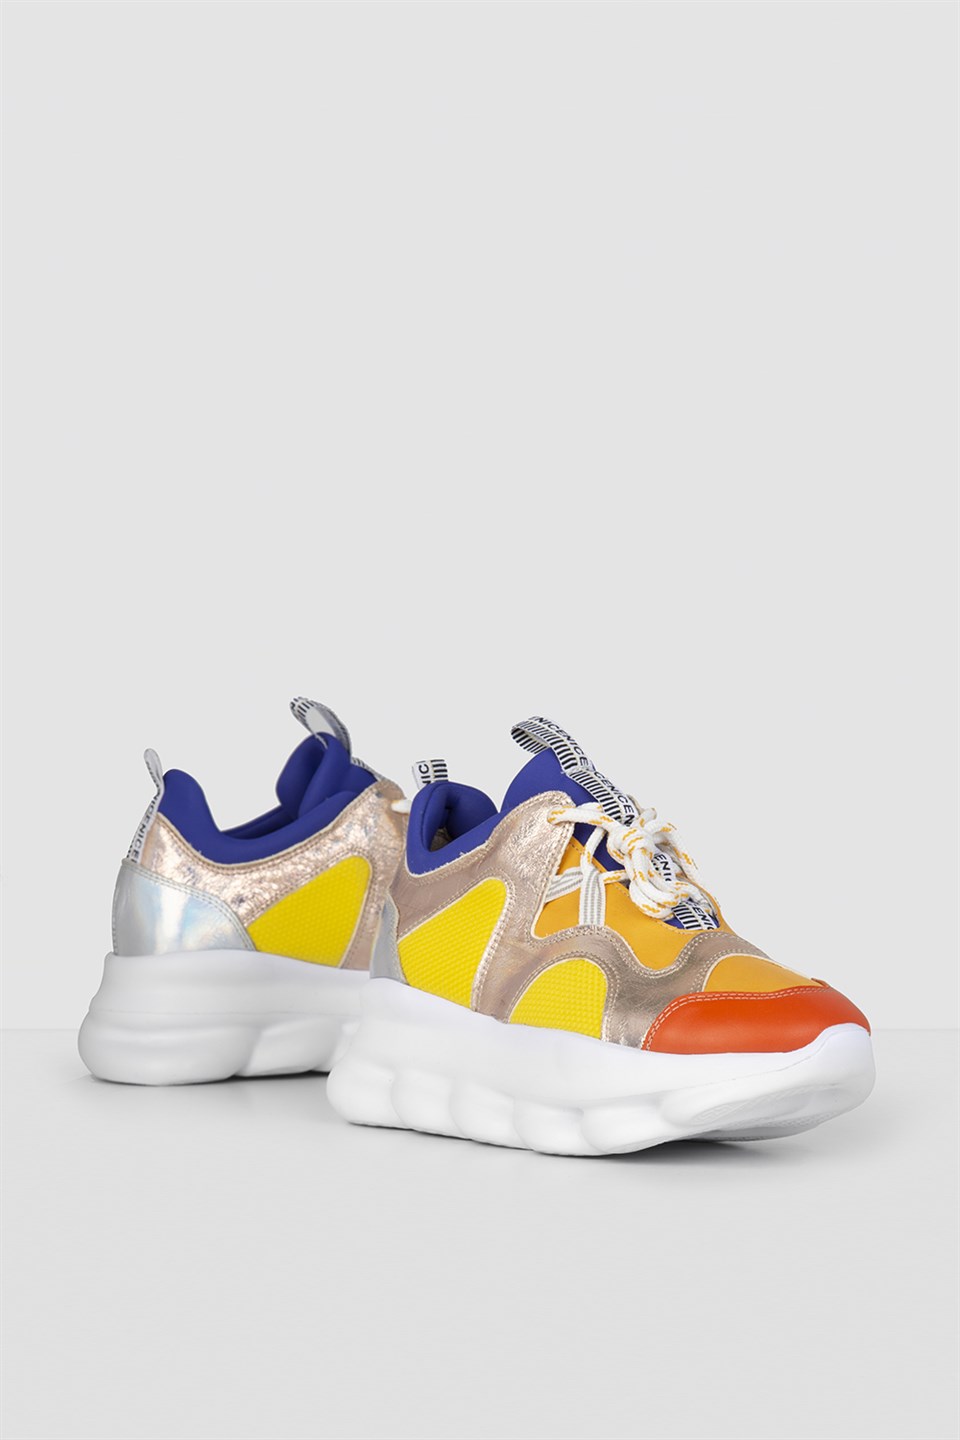 orange and blue womens sneakers